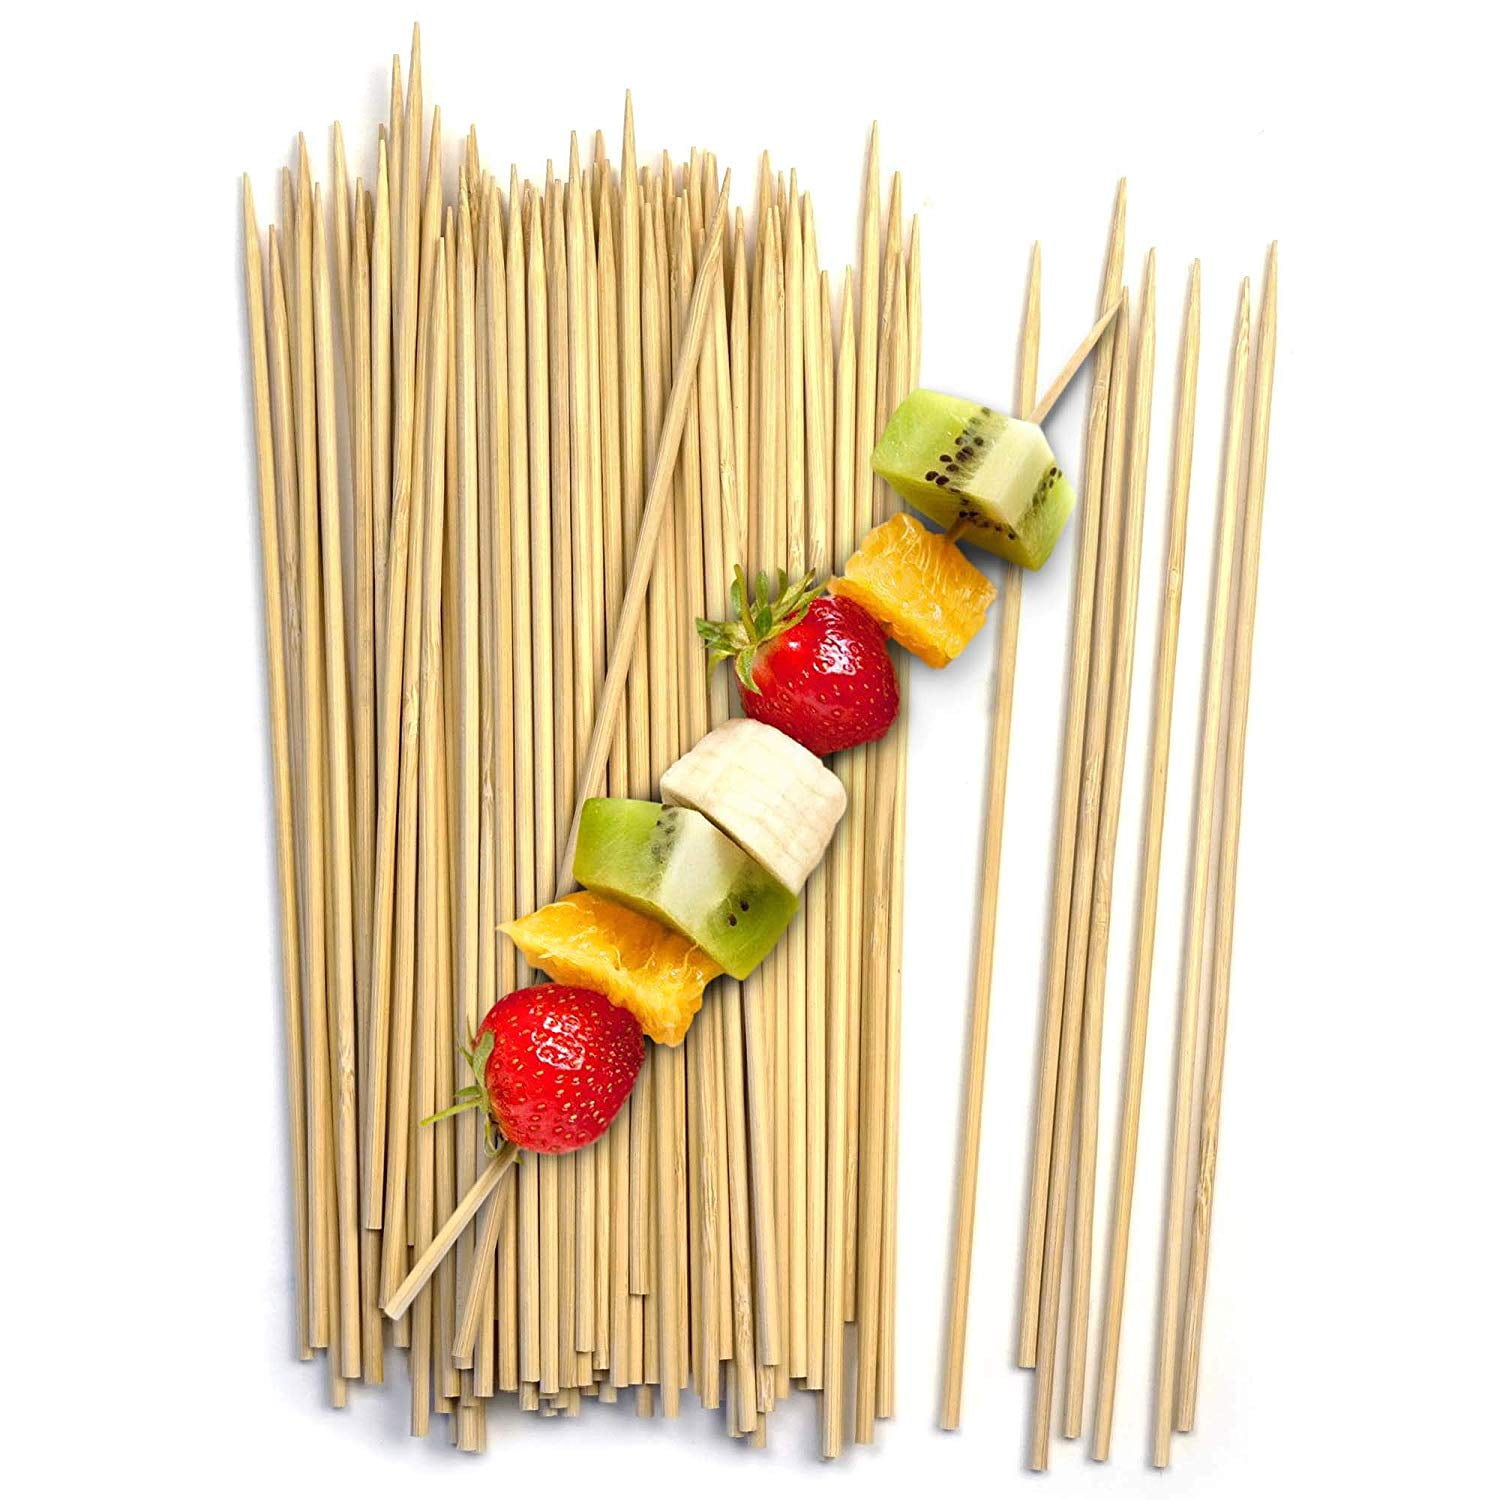 100 Jumbo Skewers Sticks Bamboo 12 Inch Wooden Skewers Sticks for Chocolate Fountain BBQ Appetizer Cocktail Kabob and Fruit